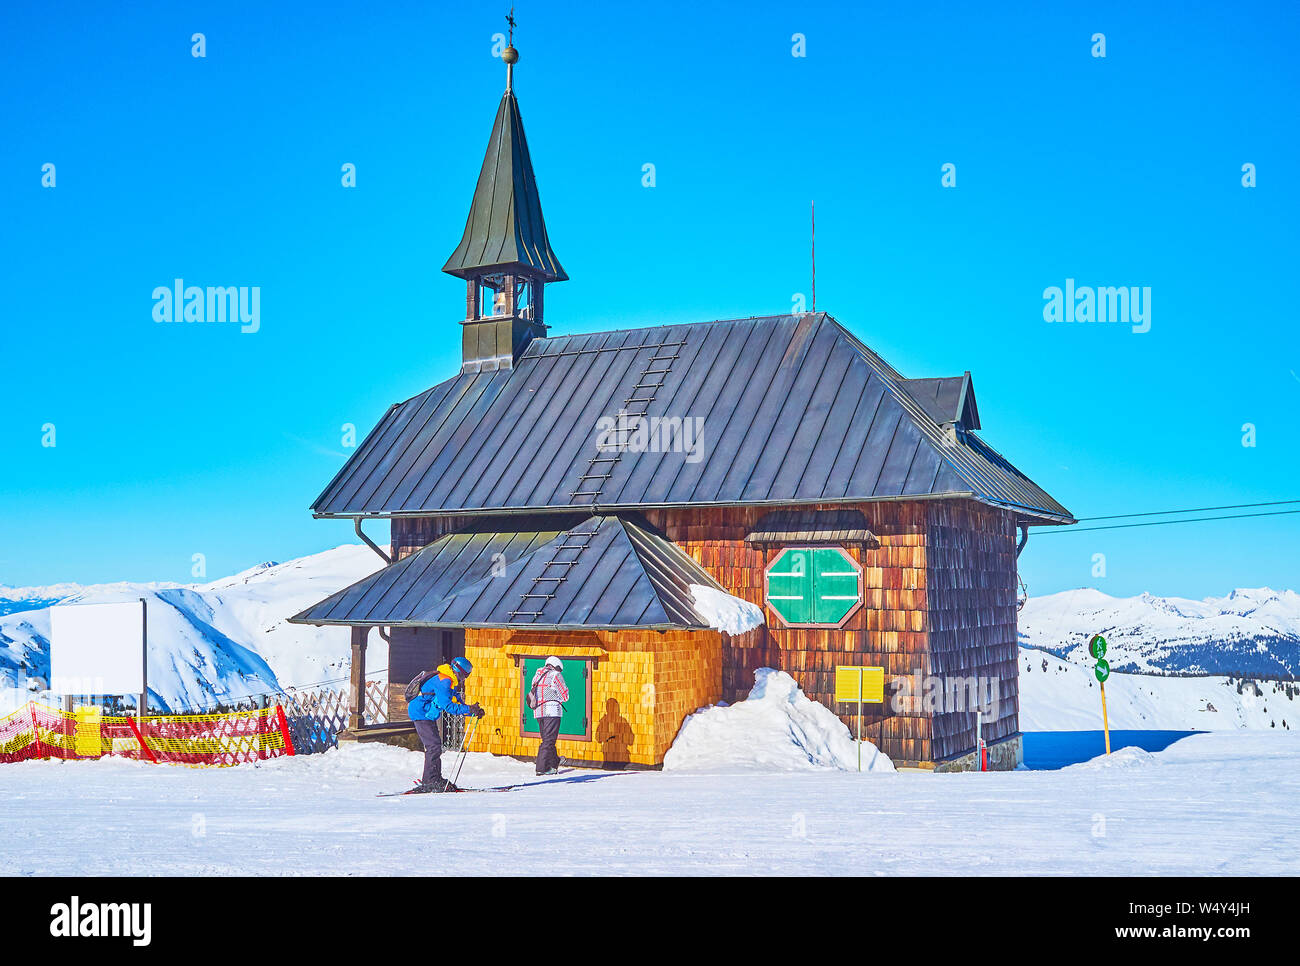 The small wooden Elizabeth chapel is the main architectural landmark, located on the top of Schmittenhohe mountain, becoming popular ski resort in win Stock Photo